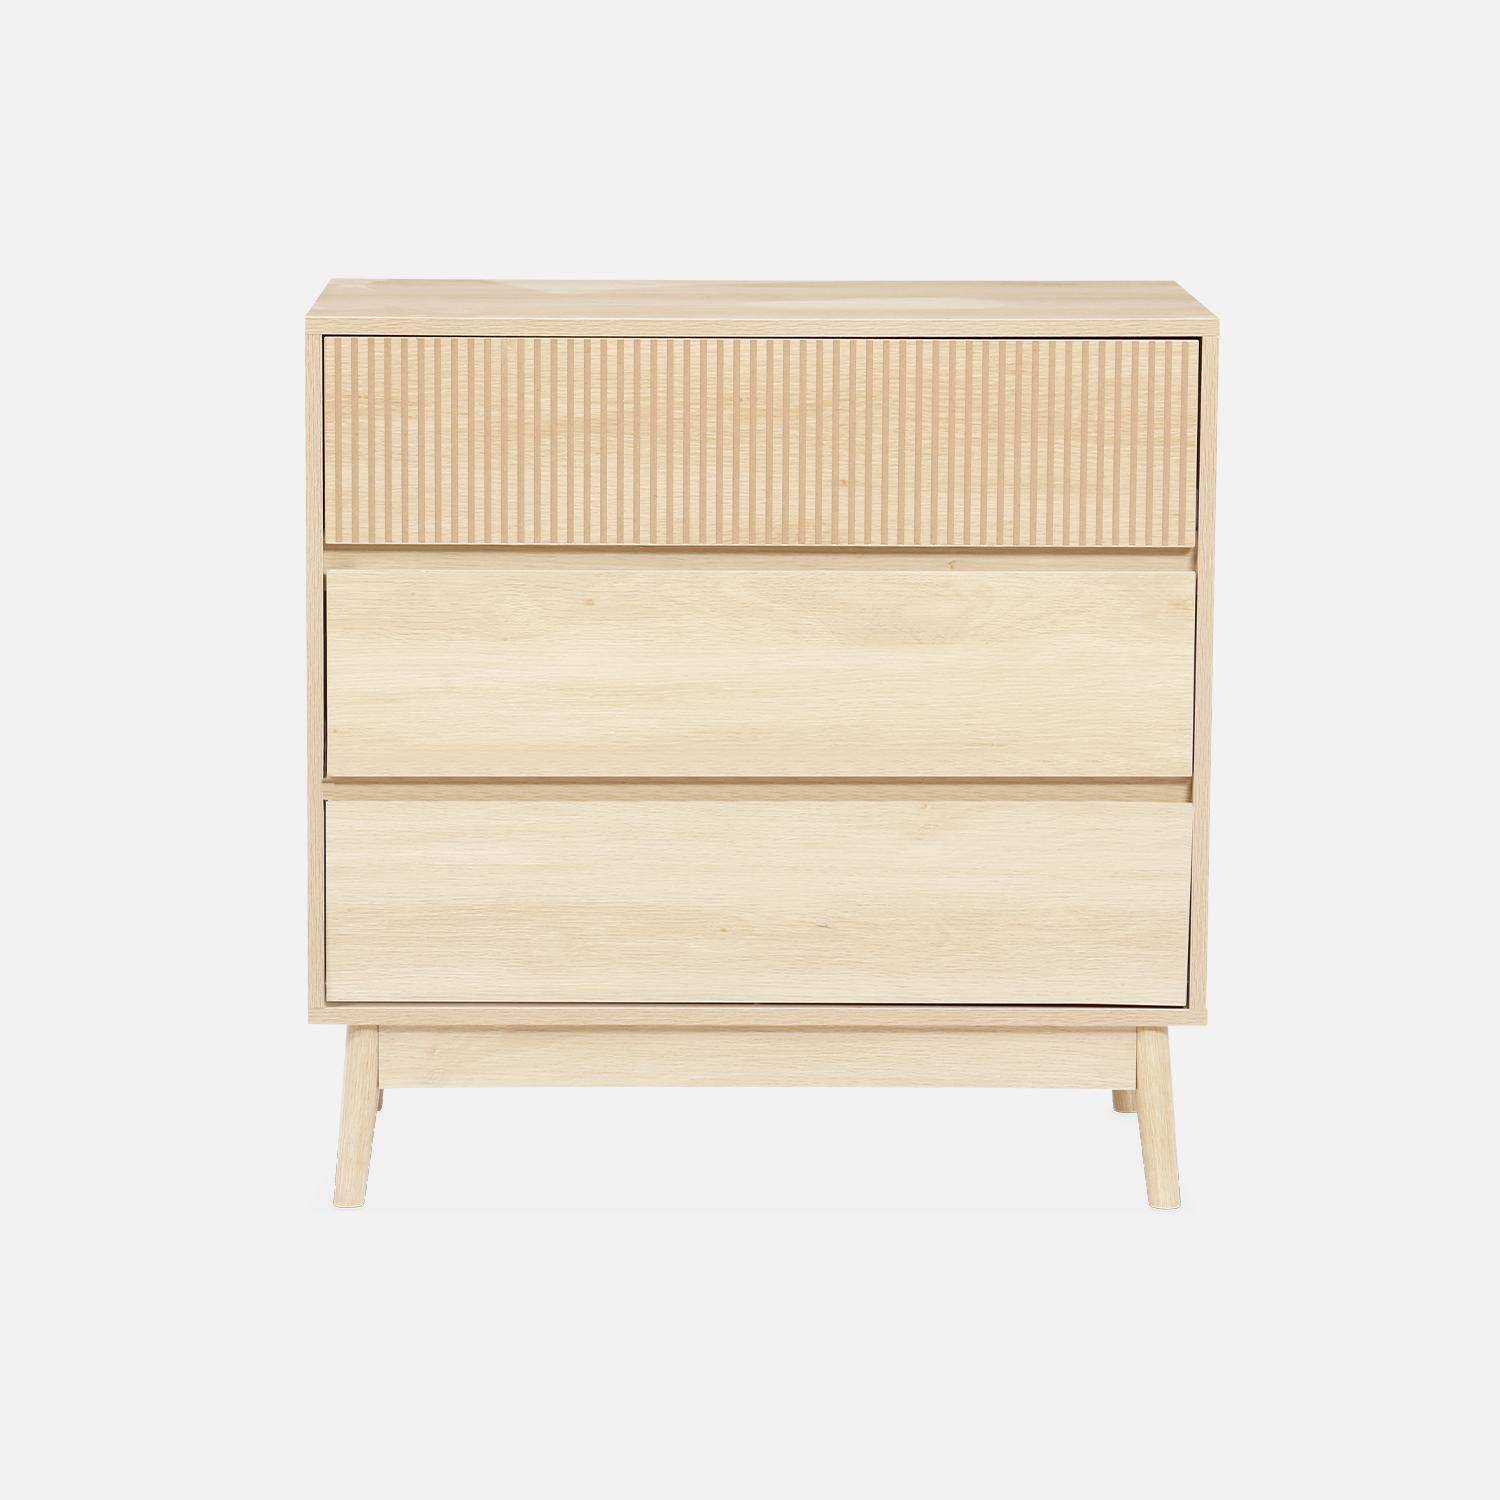 Grooved wood detail 3-drawer chest, 80x40x80cm - Linear - Natural Wood colour Photo4